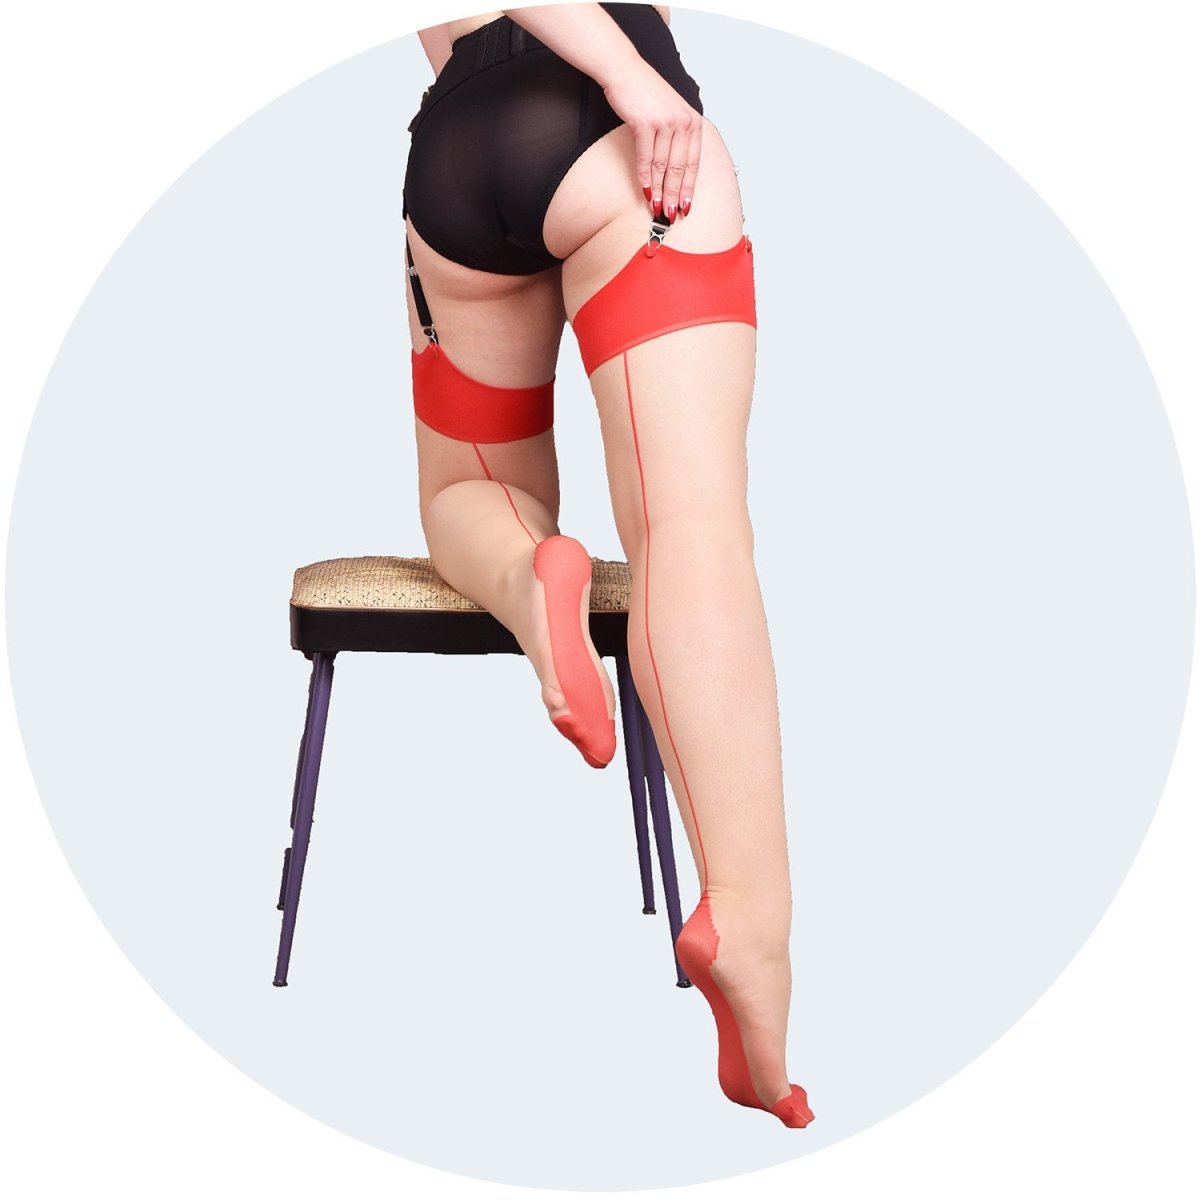 Glamour Seamed Stockings